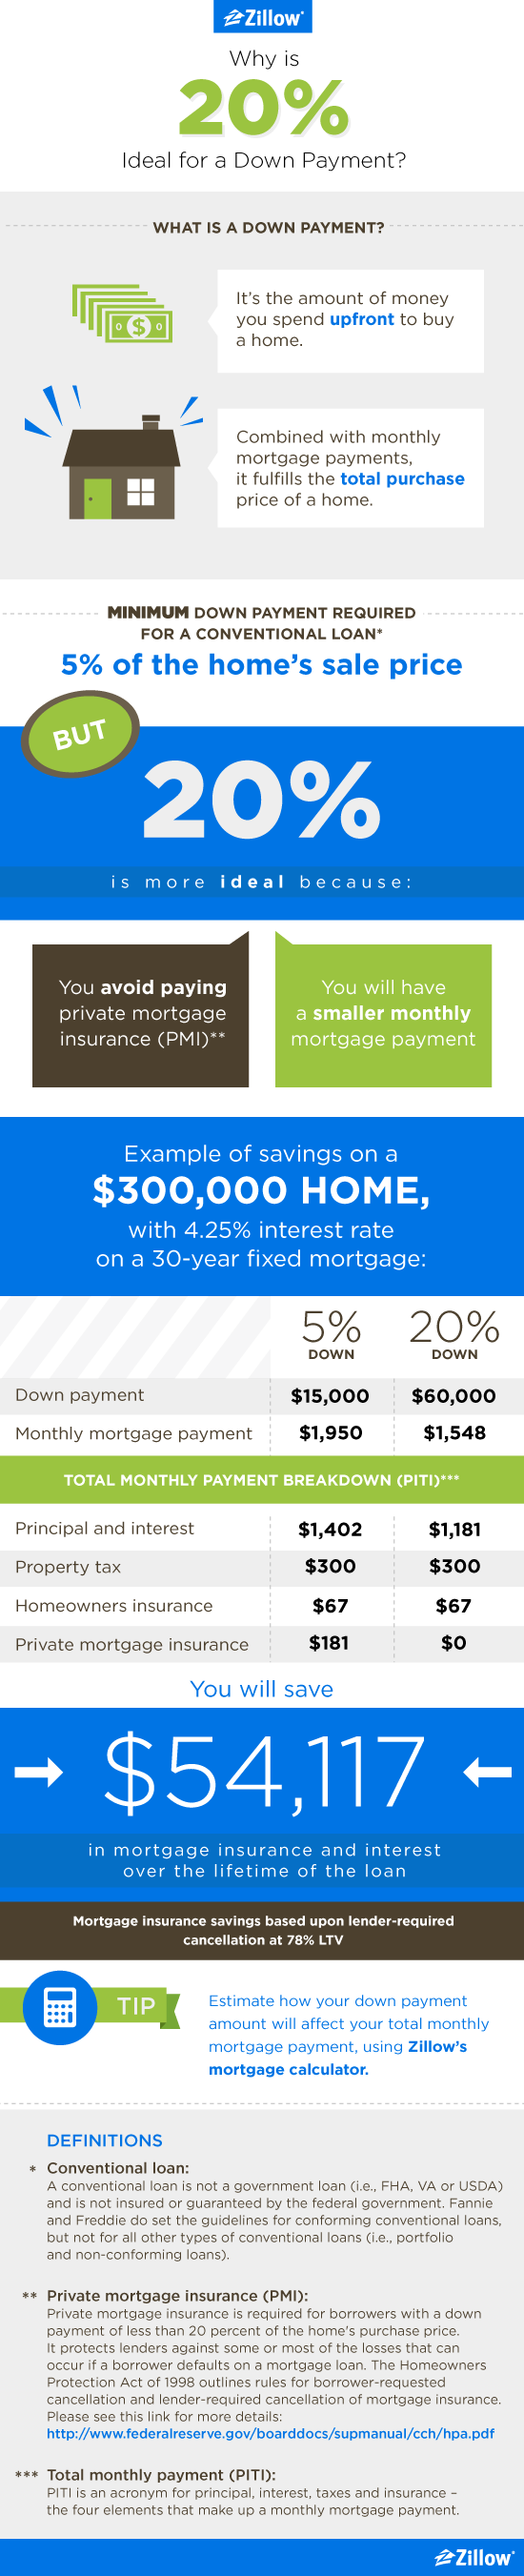 how to get a mortgage without a down payment